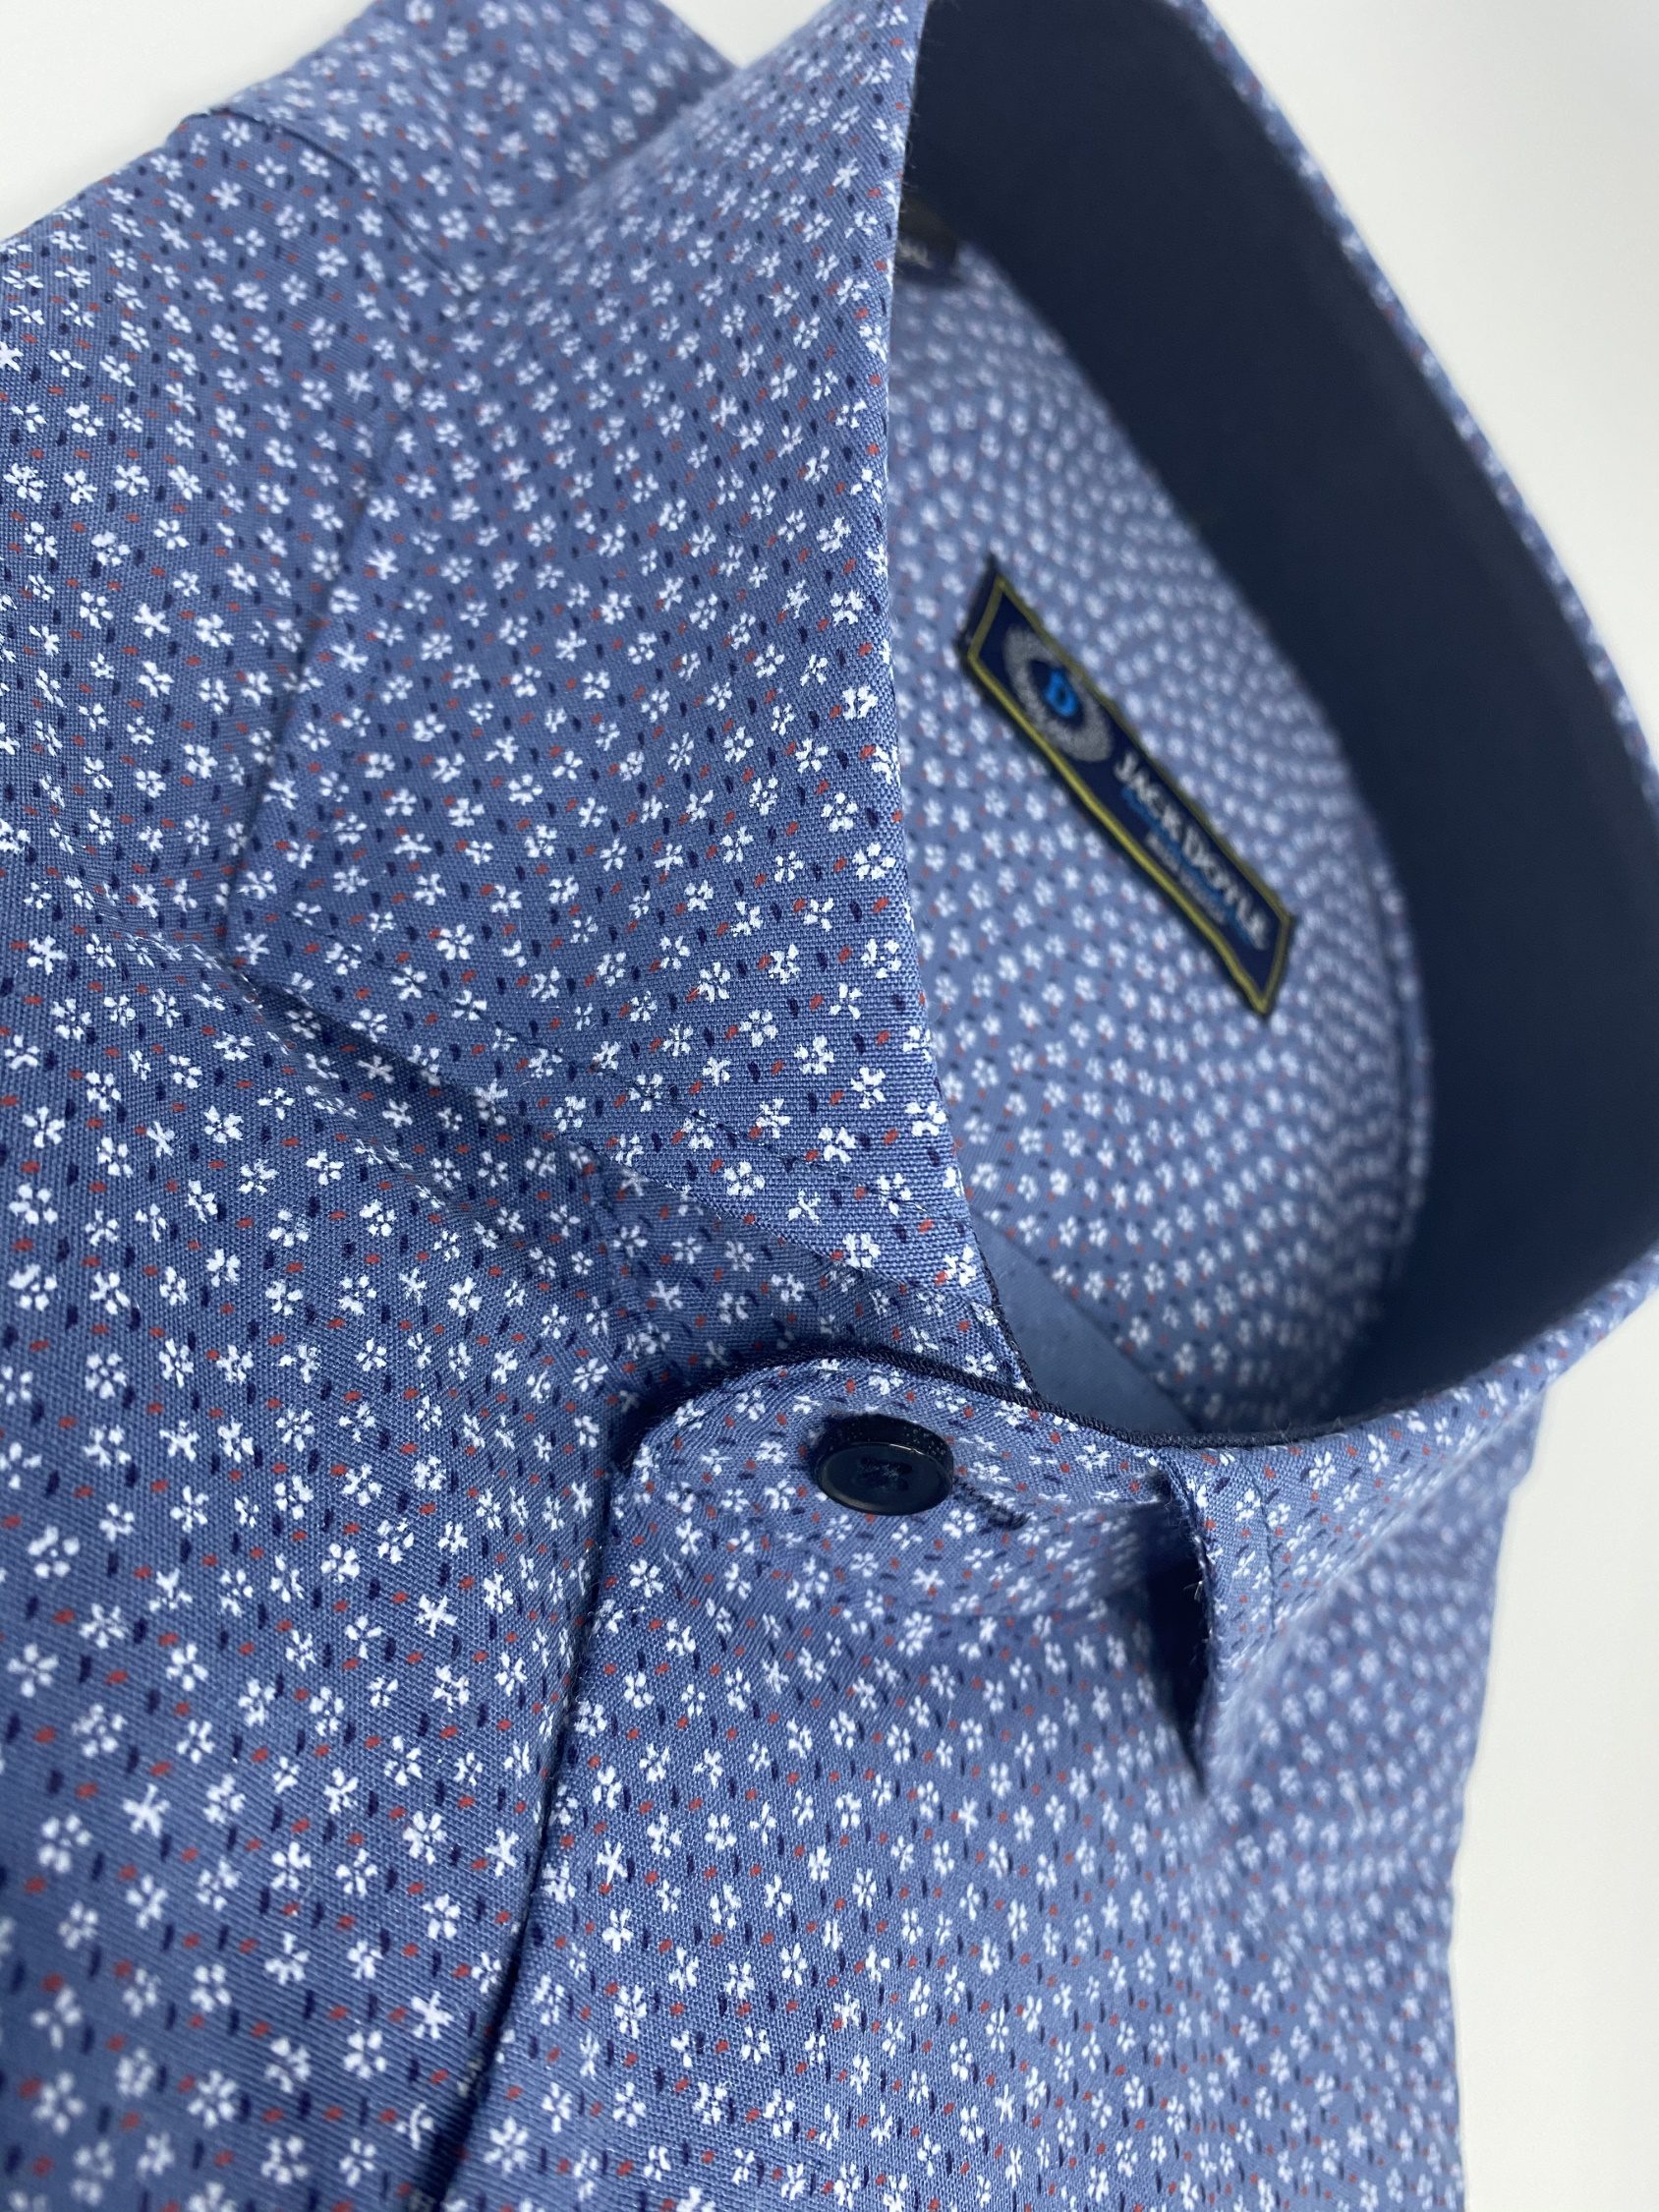 Blue Shirt With White Floral Print | Suits.ie